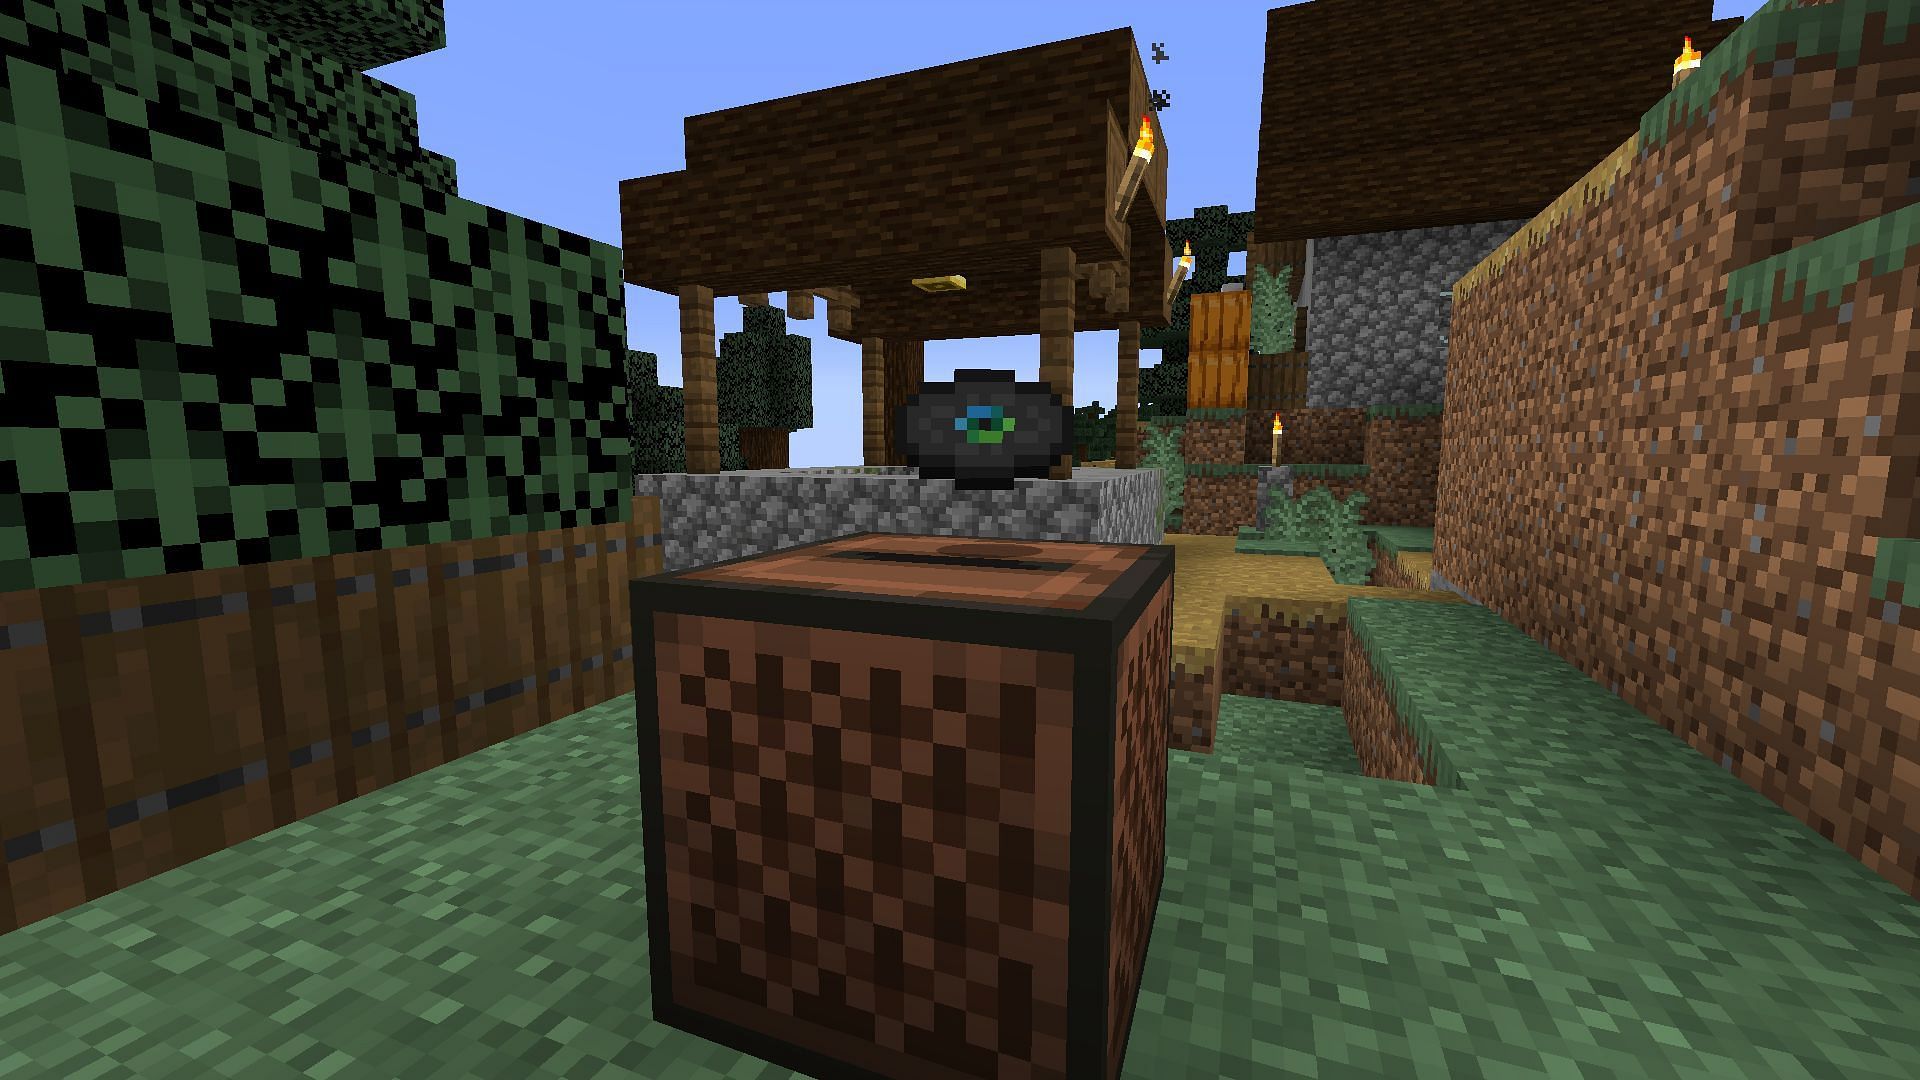 New music and music disc have been added in snapshot 21w42a (Image via Minecraft)